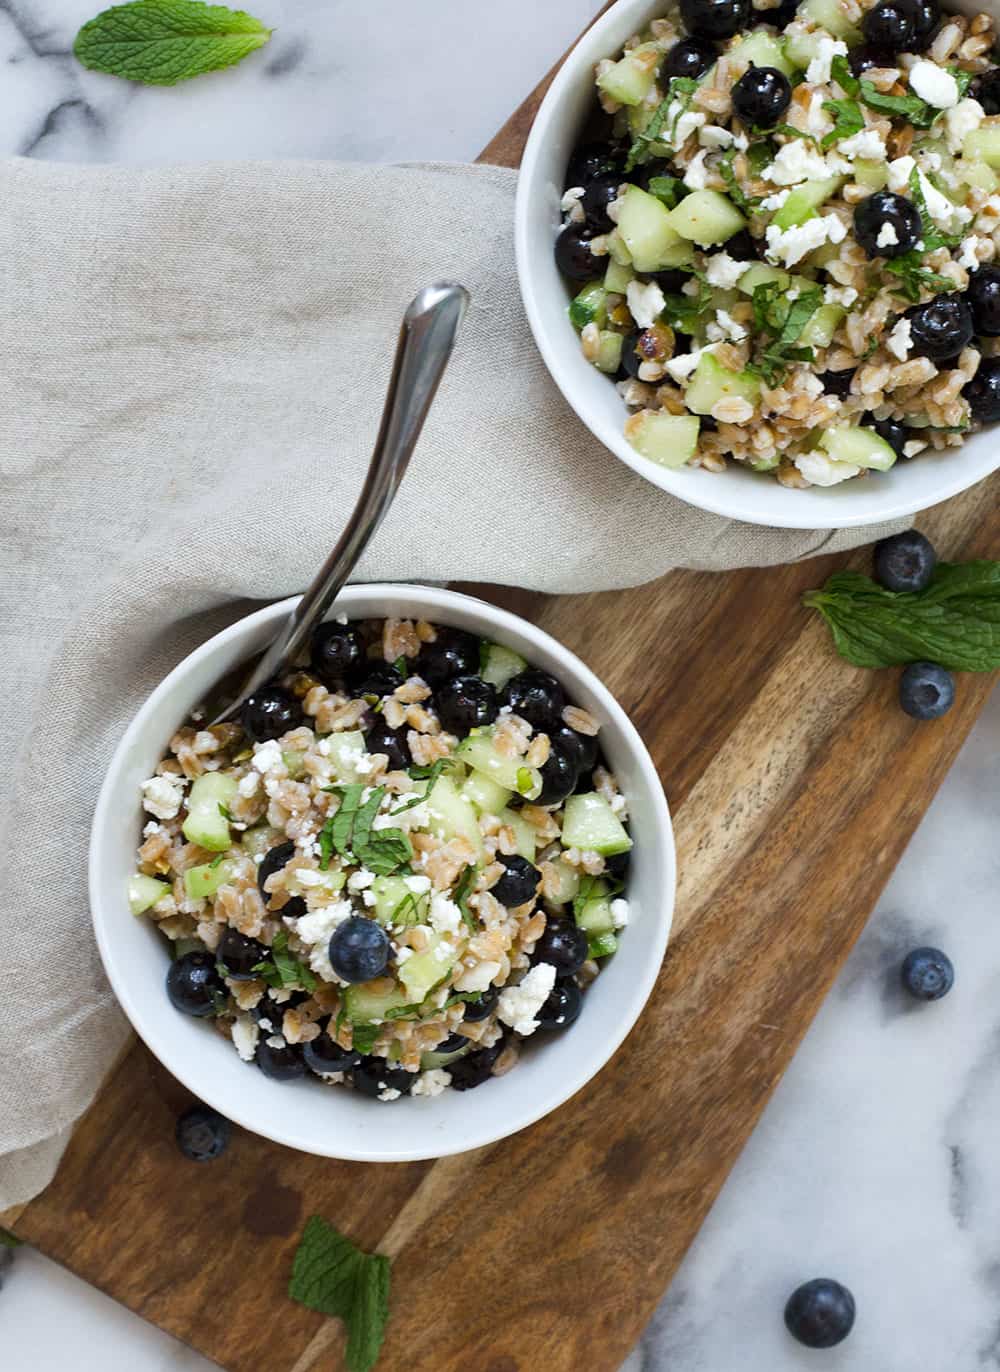 Blueberry and Farro Salad
